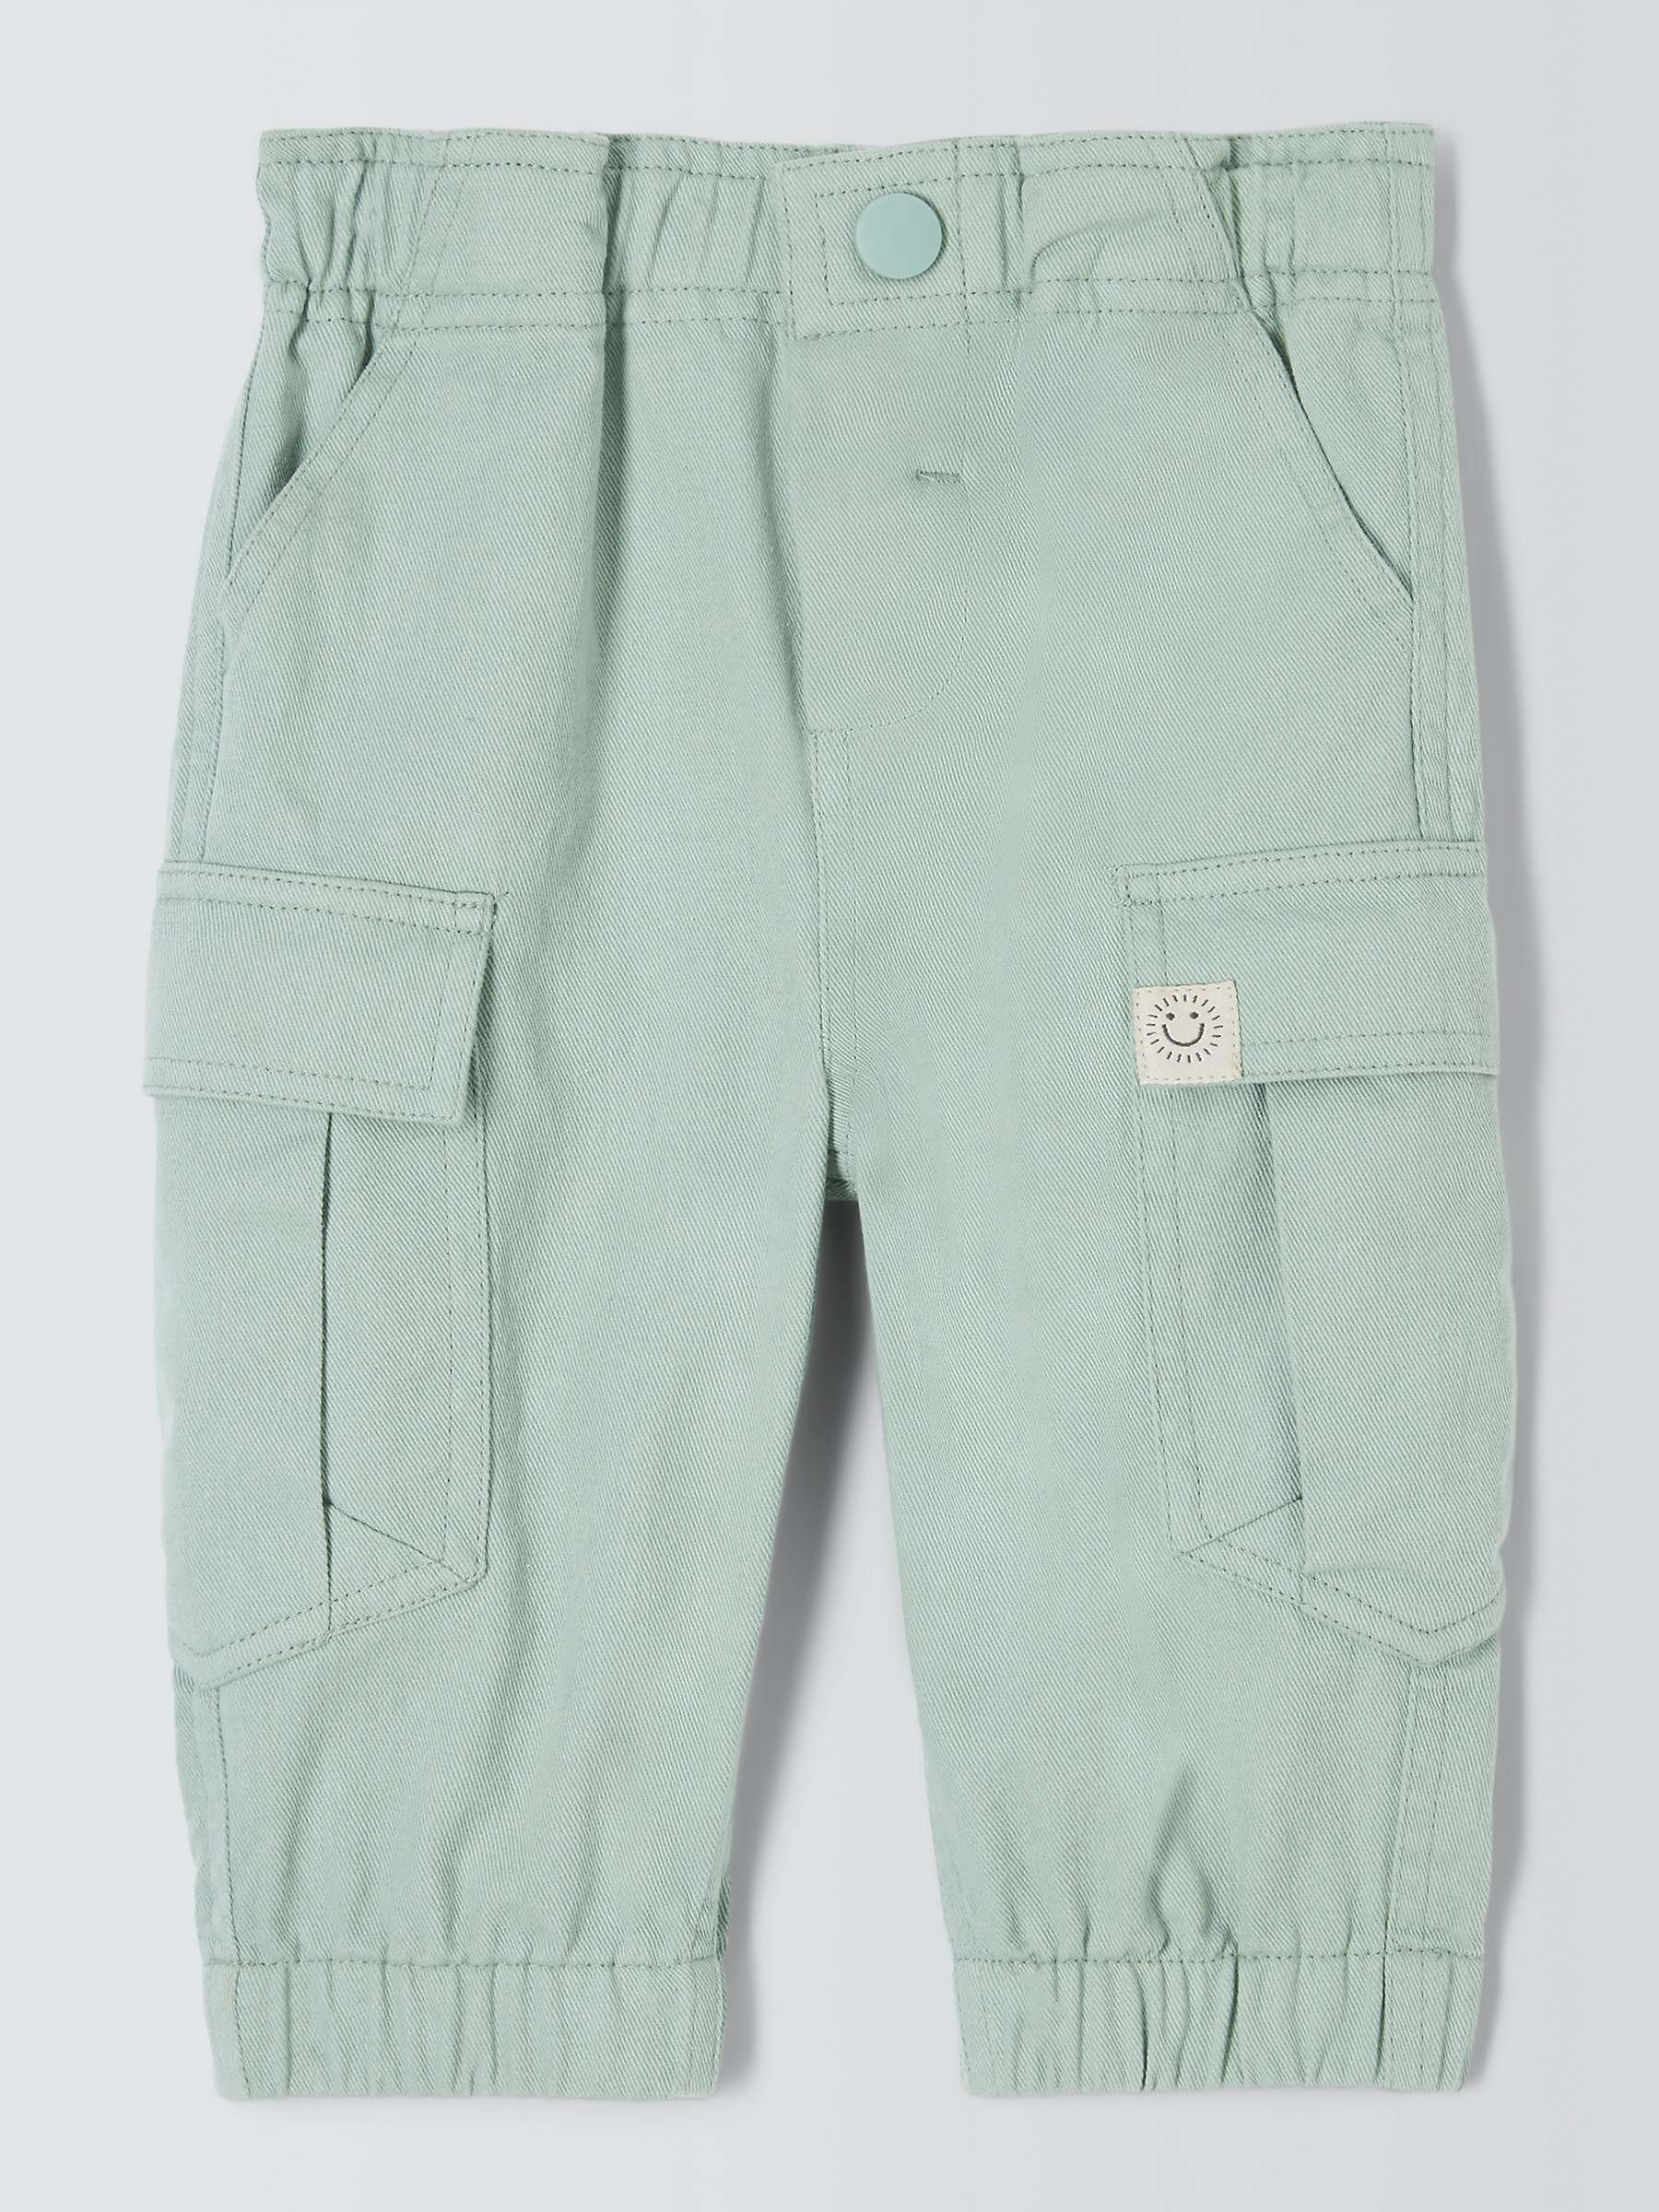 Buy John Lewis Baby Twill Cargo Trousers Online at johnlewis.com